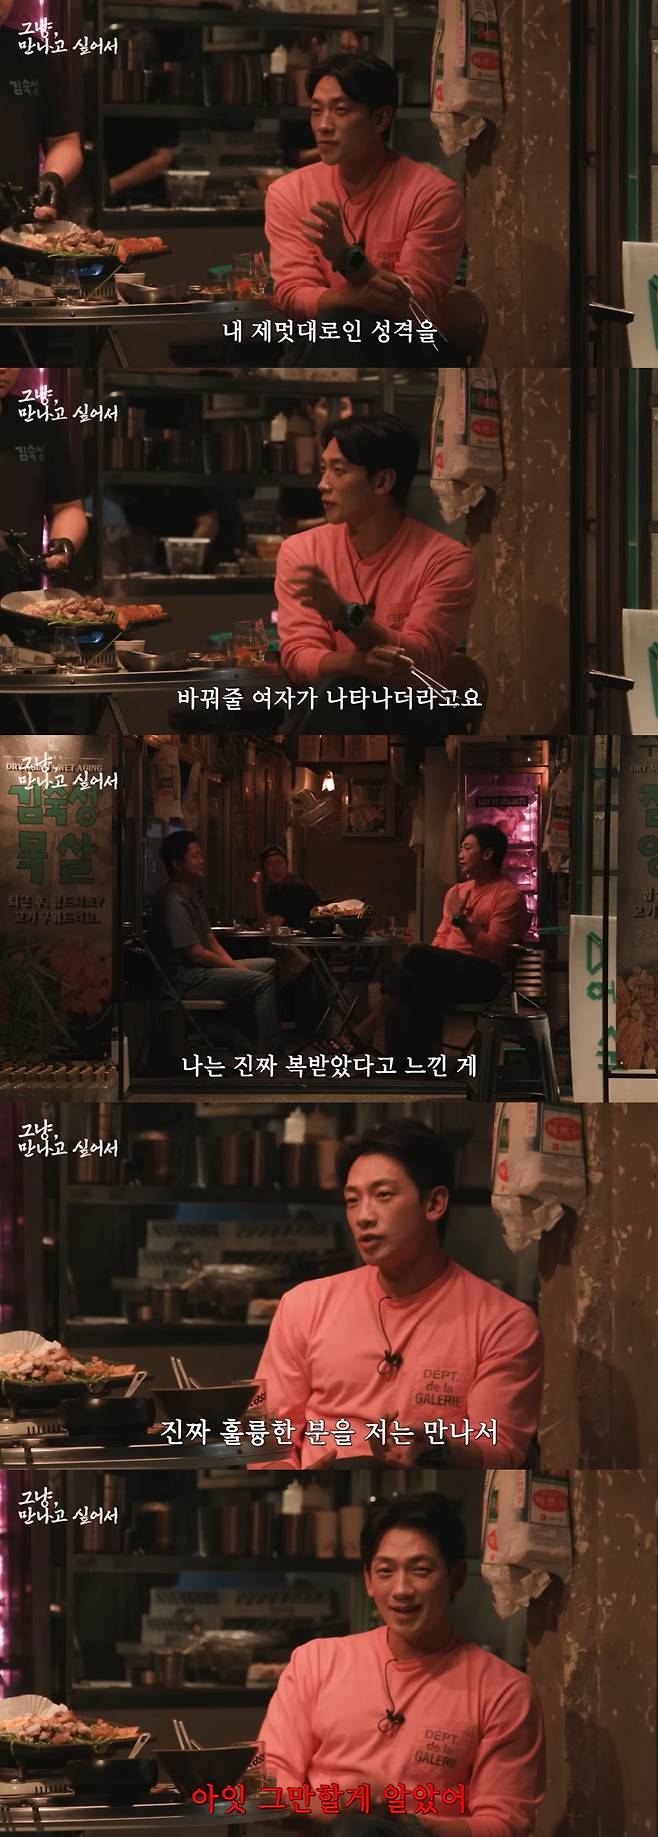 Rain showed his lover side.On Rains YouTube channel Rain Season on the 7th, Rains appearance to meet Kim Dae-ho MBC announcer was revealed.On this day, Rain said, I really wanted to meet you about the reason I invited Kim Dae-ho as a guest. He then took out the sake that was presented to the fan and invited him to drink together.Kim Dae-ho said, In fact, Haru did not eat anything all day. I eat one meal at Haru. I have not eaten breakfast since high school.And at lunch time, I have time to work, but I have a hard time eating and working, so its better to just work on an empty stomach. Rain said, I used to eat one meal a day.He said, People change and become more sensitive.In addition, Kim Dae-ho said, My friends around me were so envious of me, saying, How can I go see Rain? In fact, I dont talk much about my future, but I wanted to brag about it a little, so I talked a lot around me.But on the other hand, I thought, Oh, its time to do it. Because Ive been looking for so many these days, I thought Id be contacted. I might not come. Rain carefully asked Kim Dae-ho, Excuse me, are you dating someone right now? Kim Dae-ho answered no, and Rain asked, Do you want to date or do you have any feelings like this?Kim Dae-ho candidly said, Actually, its hard for me to date women because I do what I want. I also drink a lot.Rain then said, Can not you meet a more selfish woman? Kim Dae-ho said, I hate it again.In response, Rain mentioned his wife, Kim Tae-hee, saying, Someday, there will be a woman who will change my unruly personality. Even if I just do what I want, she will catch me like this.Rain then asked Kim Dae-ho to play an ideal balance game. Who would you choose between a woman who is pretty and well dressed but has a little personality, and a woman who is too good and has a good personality and whose appearance is far from ideal?Kim Dae-ho said, No. 1 without any worries, and laughed. I meet if I like it, because my heart is important.Rain said, I met a really good person who feels really blessed. He bragged to his wife Kim Tae-hee.The production team laughed at Rains appearance, and Kim Dae-ho said, I think I know what you mean. Rain apologized, Ill stop. Im sorry.Meanwhile, Rain married actor Kim Tae-hee in 2017 and has two daughters.